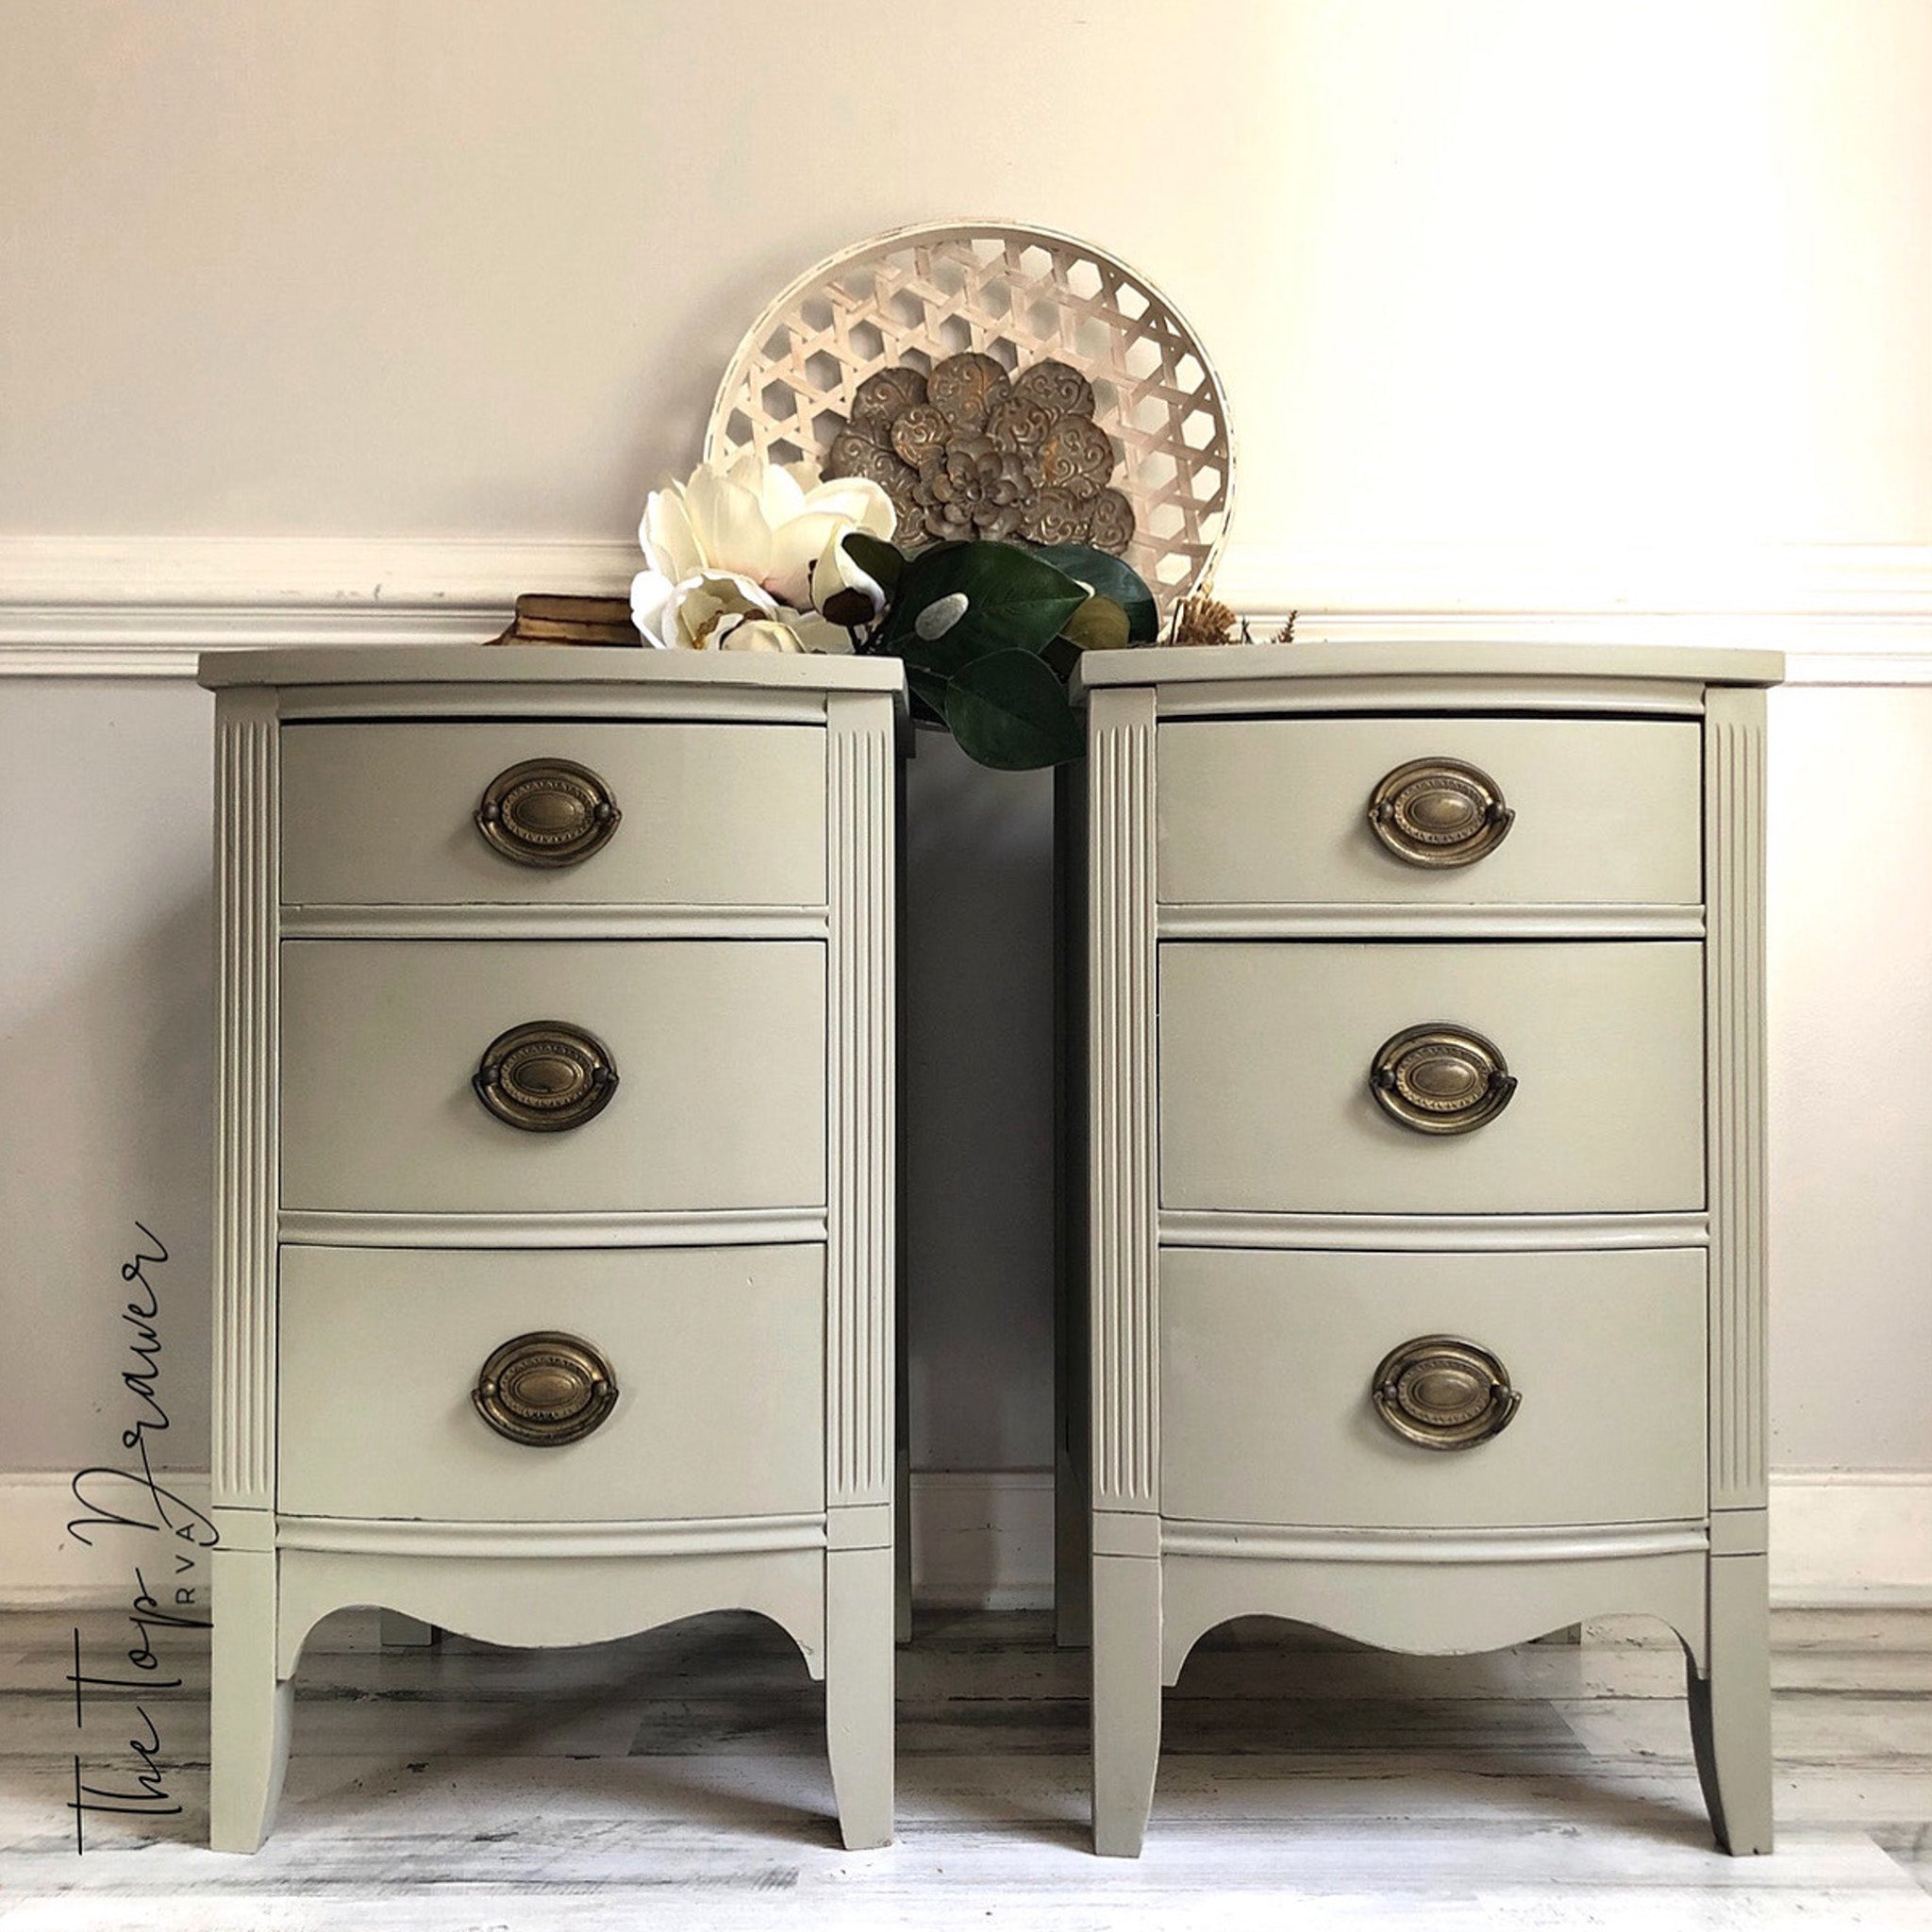 Two vintage 3-drawer nightstands refurbished by The Top Drawer are painted in Dixie Belle's Dried Sage chalk mineral paint.